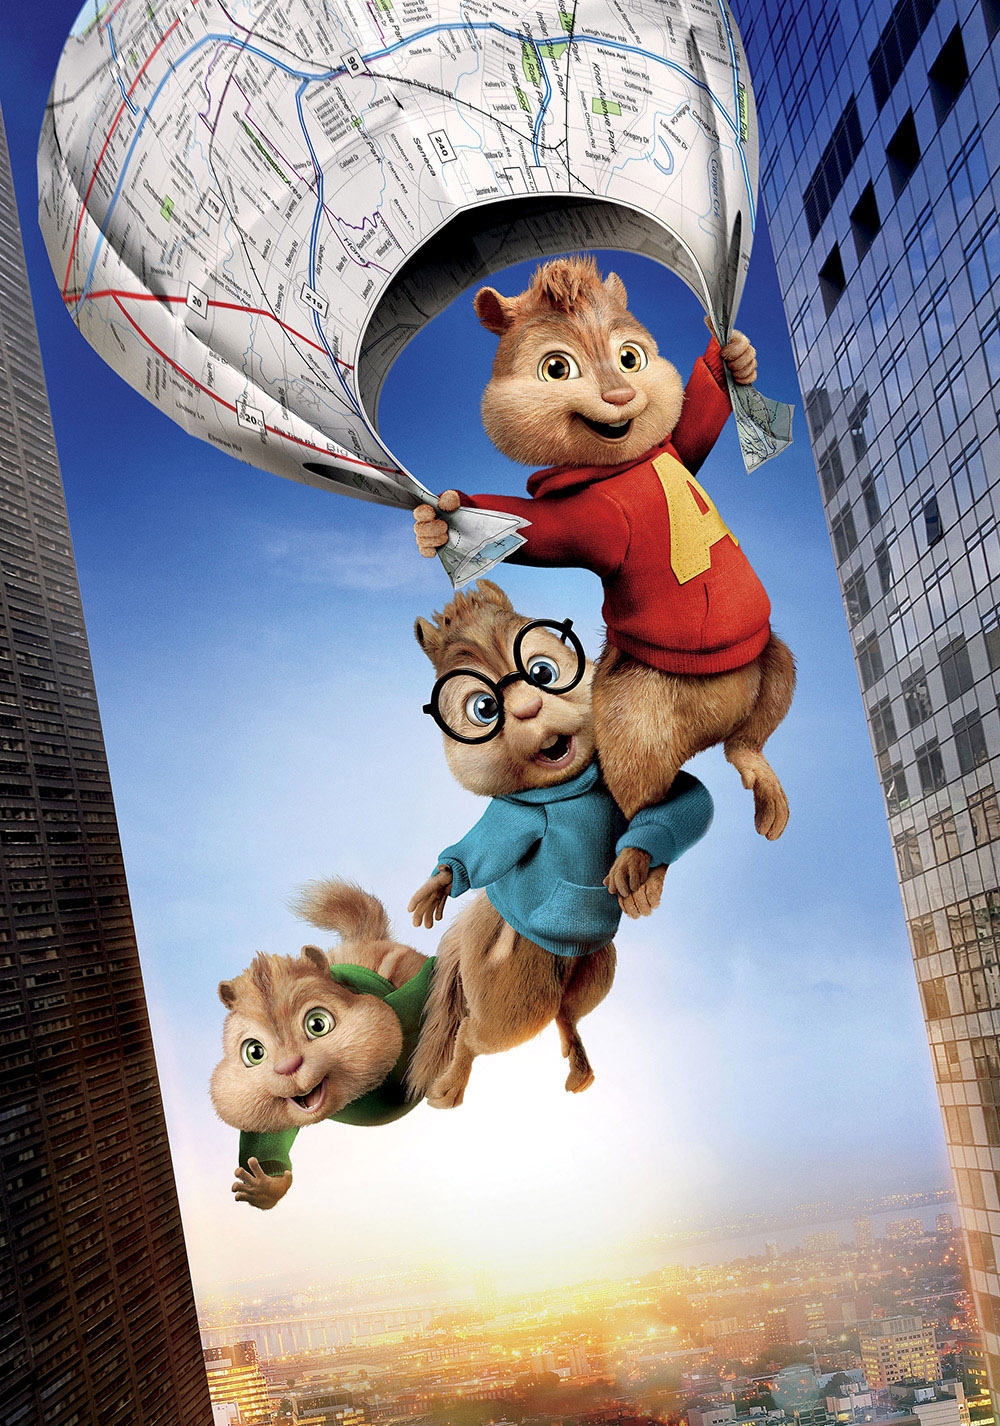 Alvin and the Chipmunks: The Road Chip Images. 